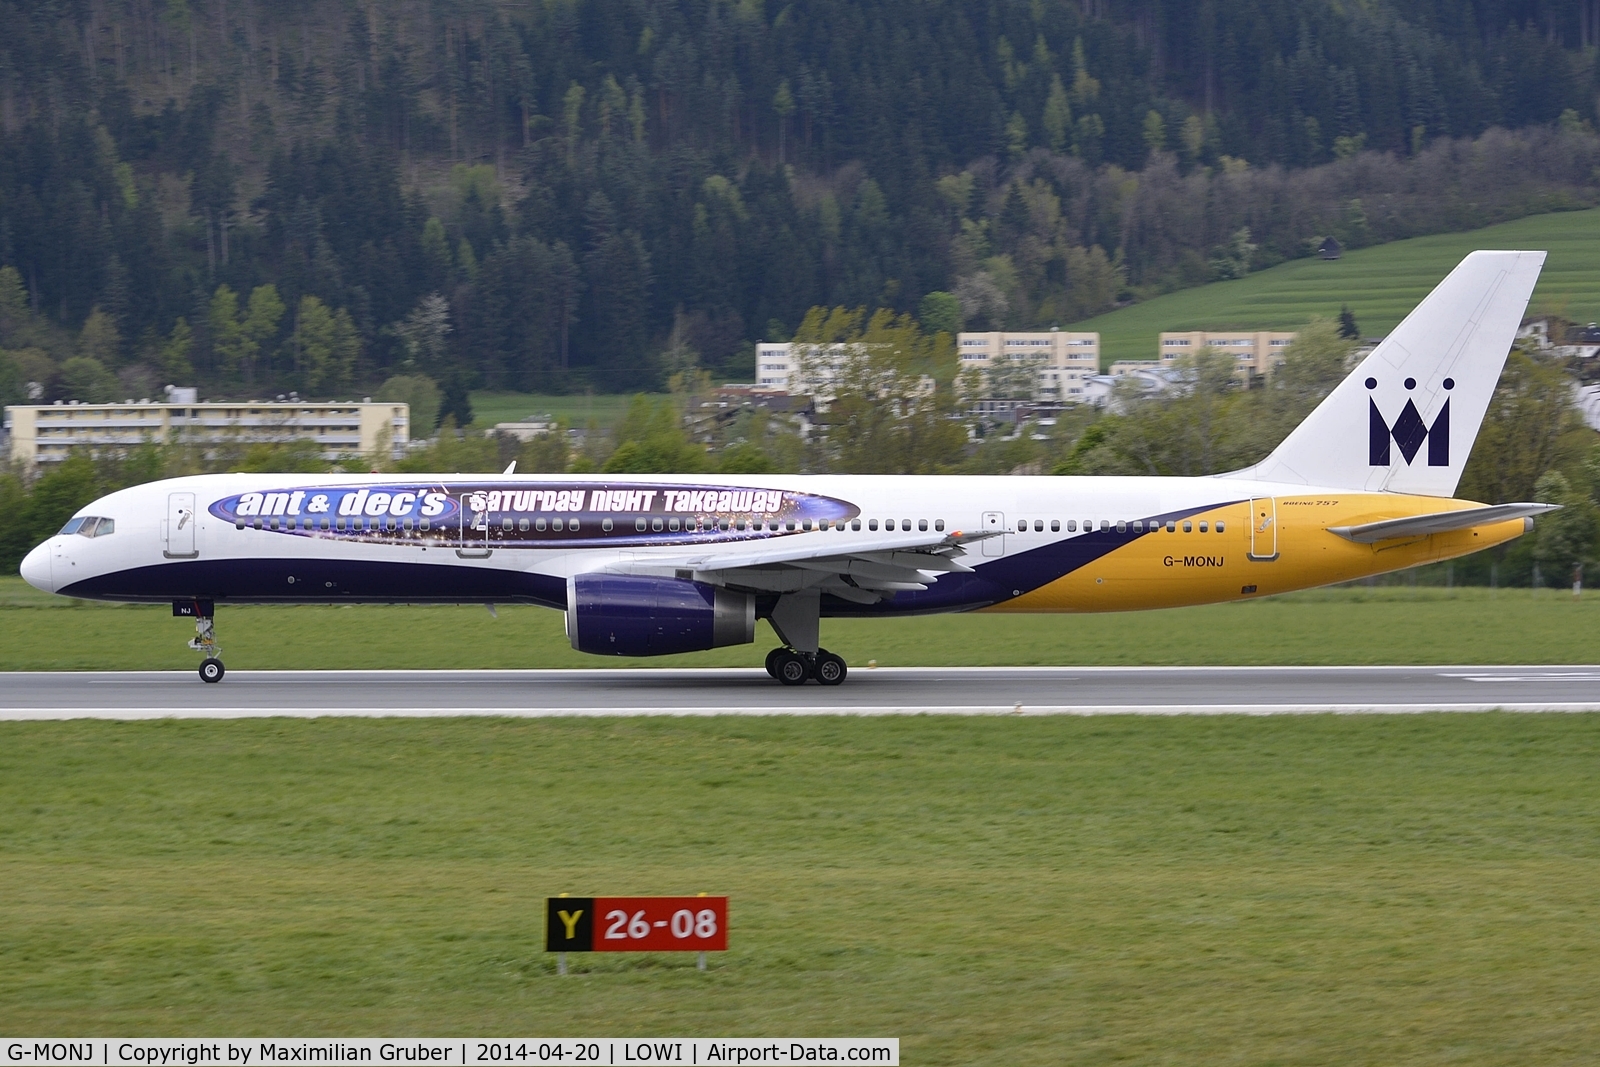 G-MONJ, 1988 Boeing 757-2T7 C/N 24104, last ever take-off of a Boeing 757-200 of Monarch Airlines